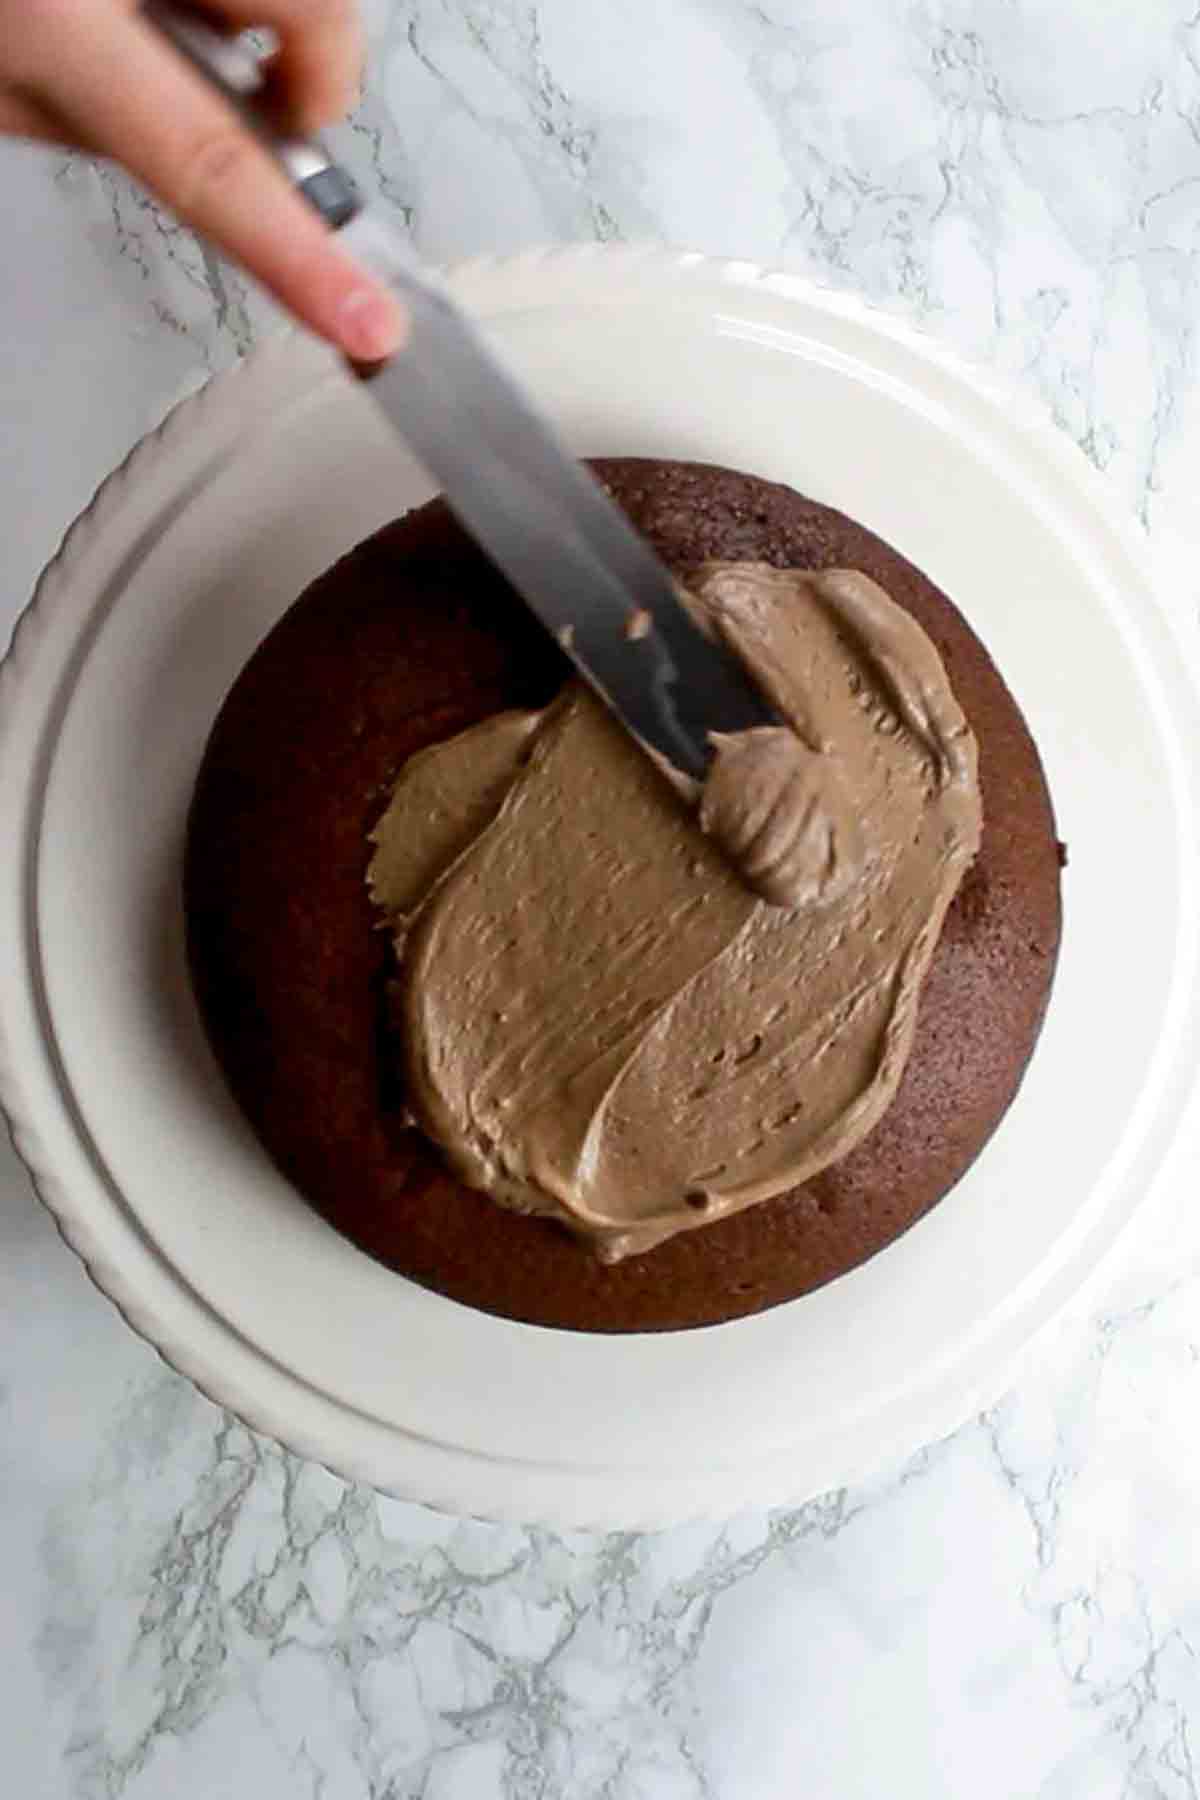 Spreading Icing Onto The Eggless Chocolate Cake